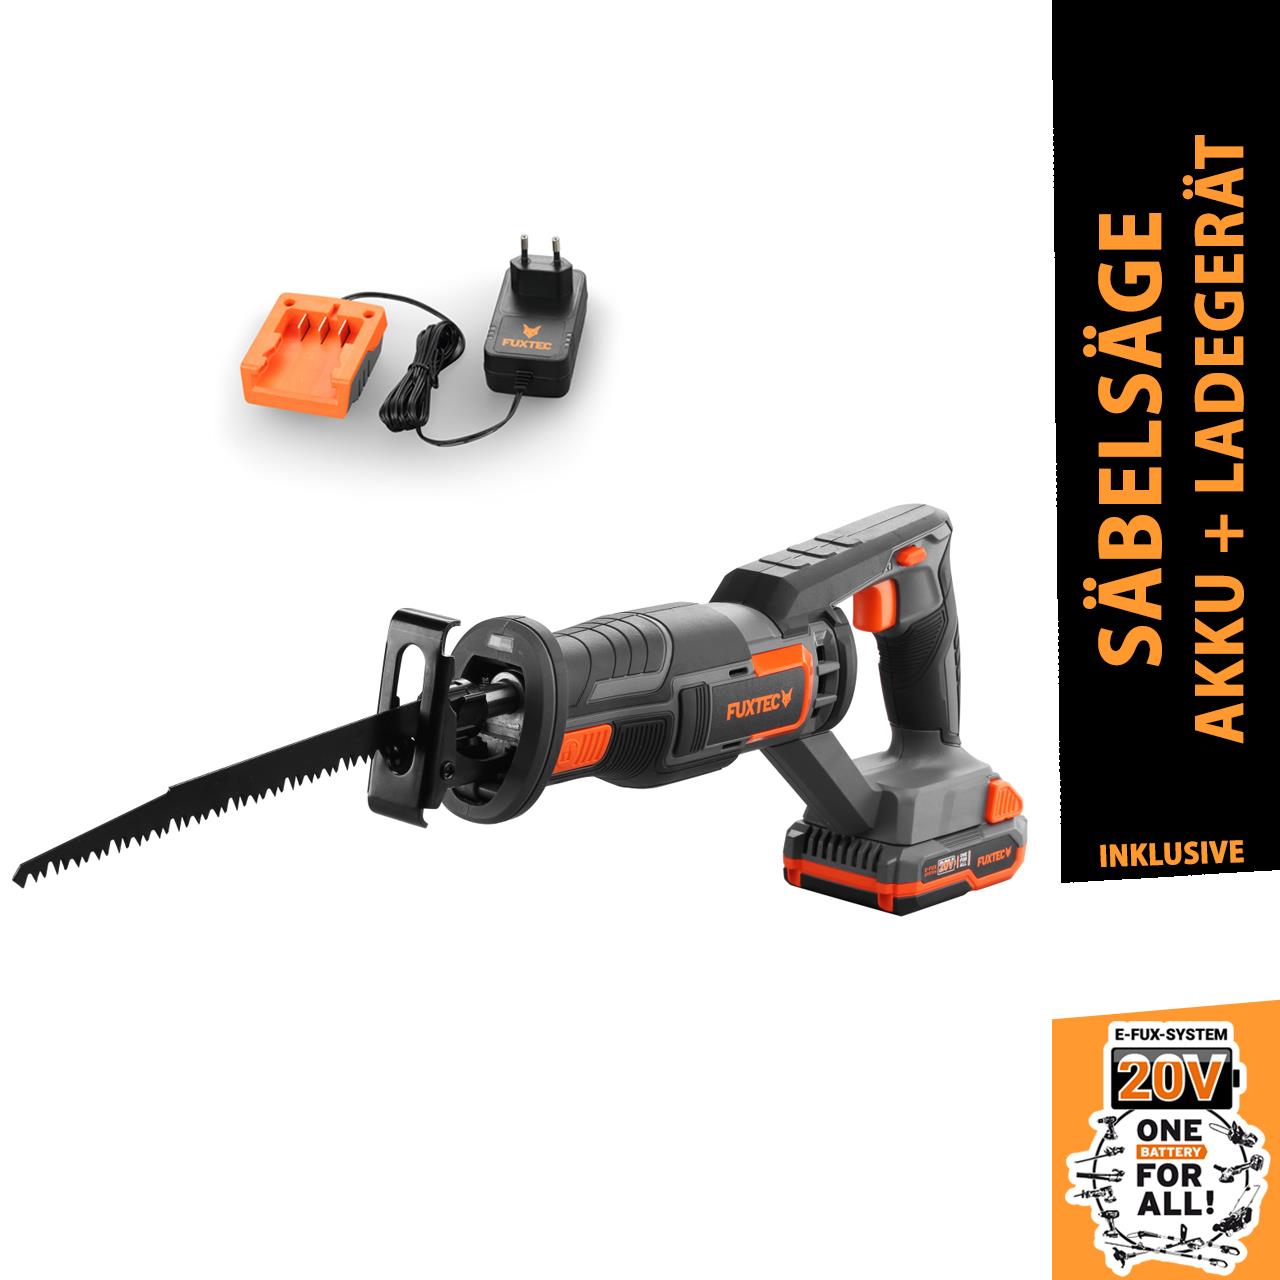 20V cordless reciprocating saw - Kit FUXTEC FX-E1SS20 incl. battery (2Ah) and charger (1A)